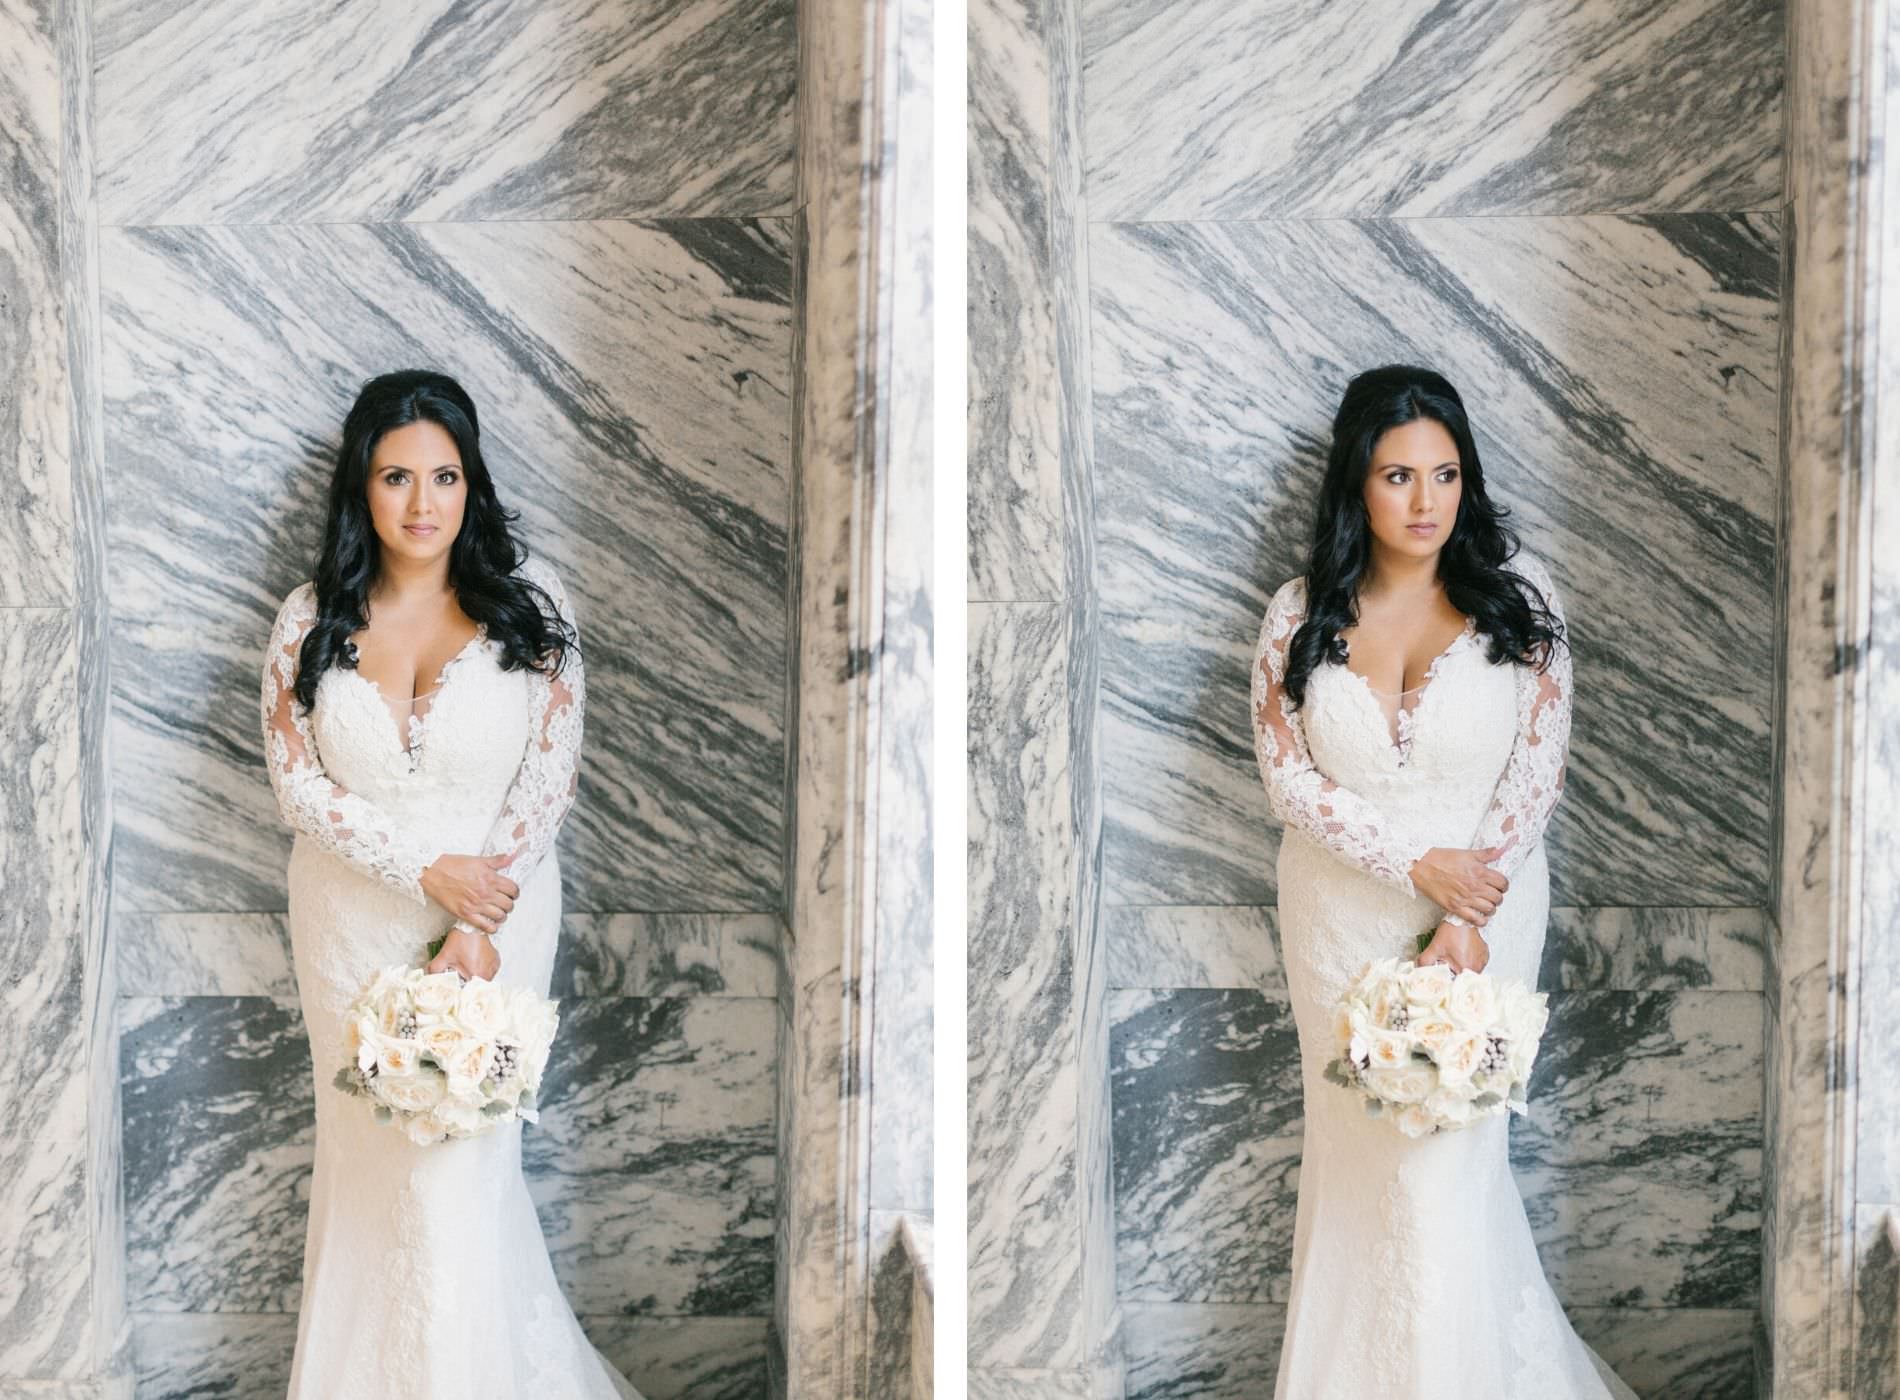 Tampa Bay Bride, Jessica Ralph of Parties A'la Carte in Lace and Illusion Fitted Rounded V Neckline Wedding Dress Holding White Roses Floral Bouquet | Historic Courthouse Wedding Venue Le Meridien